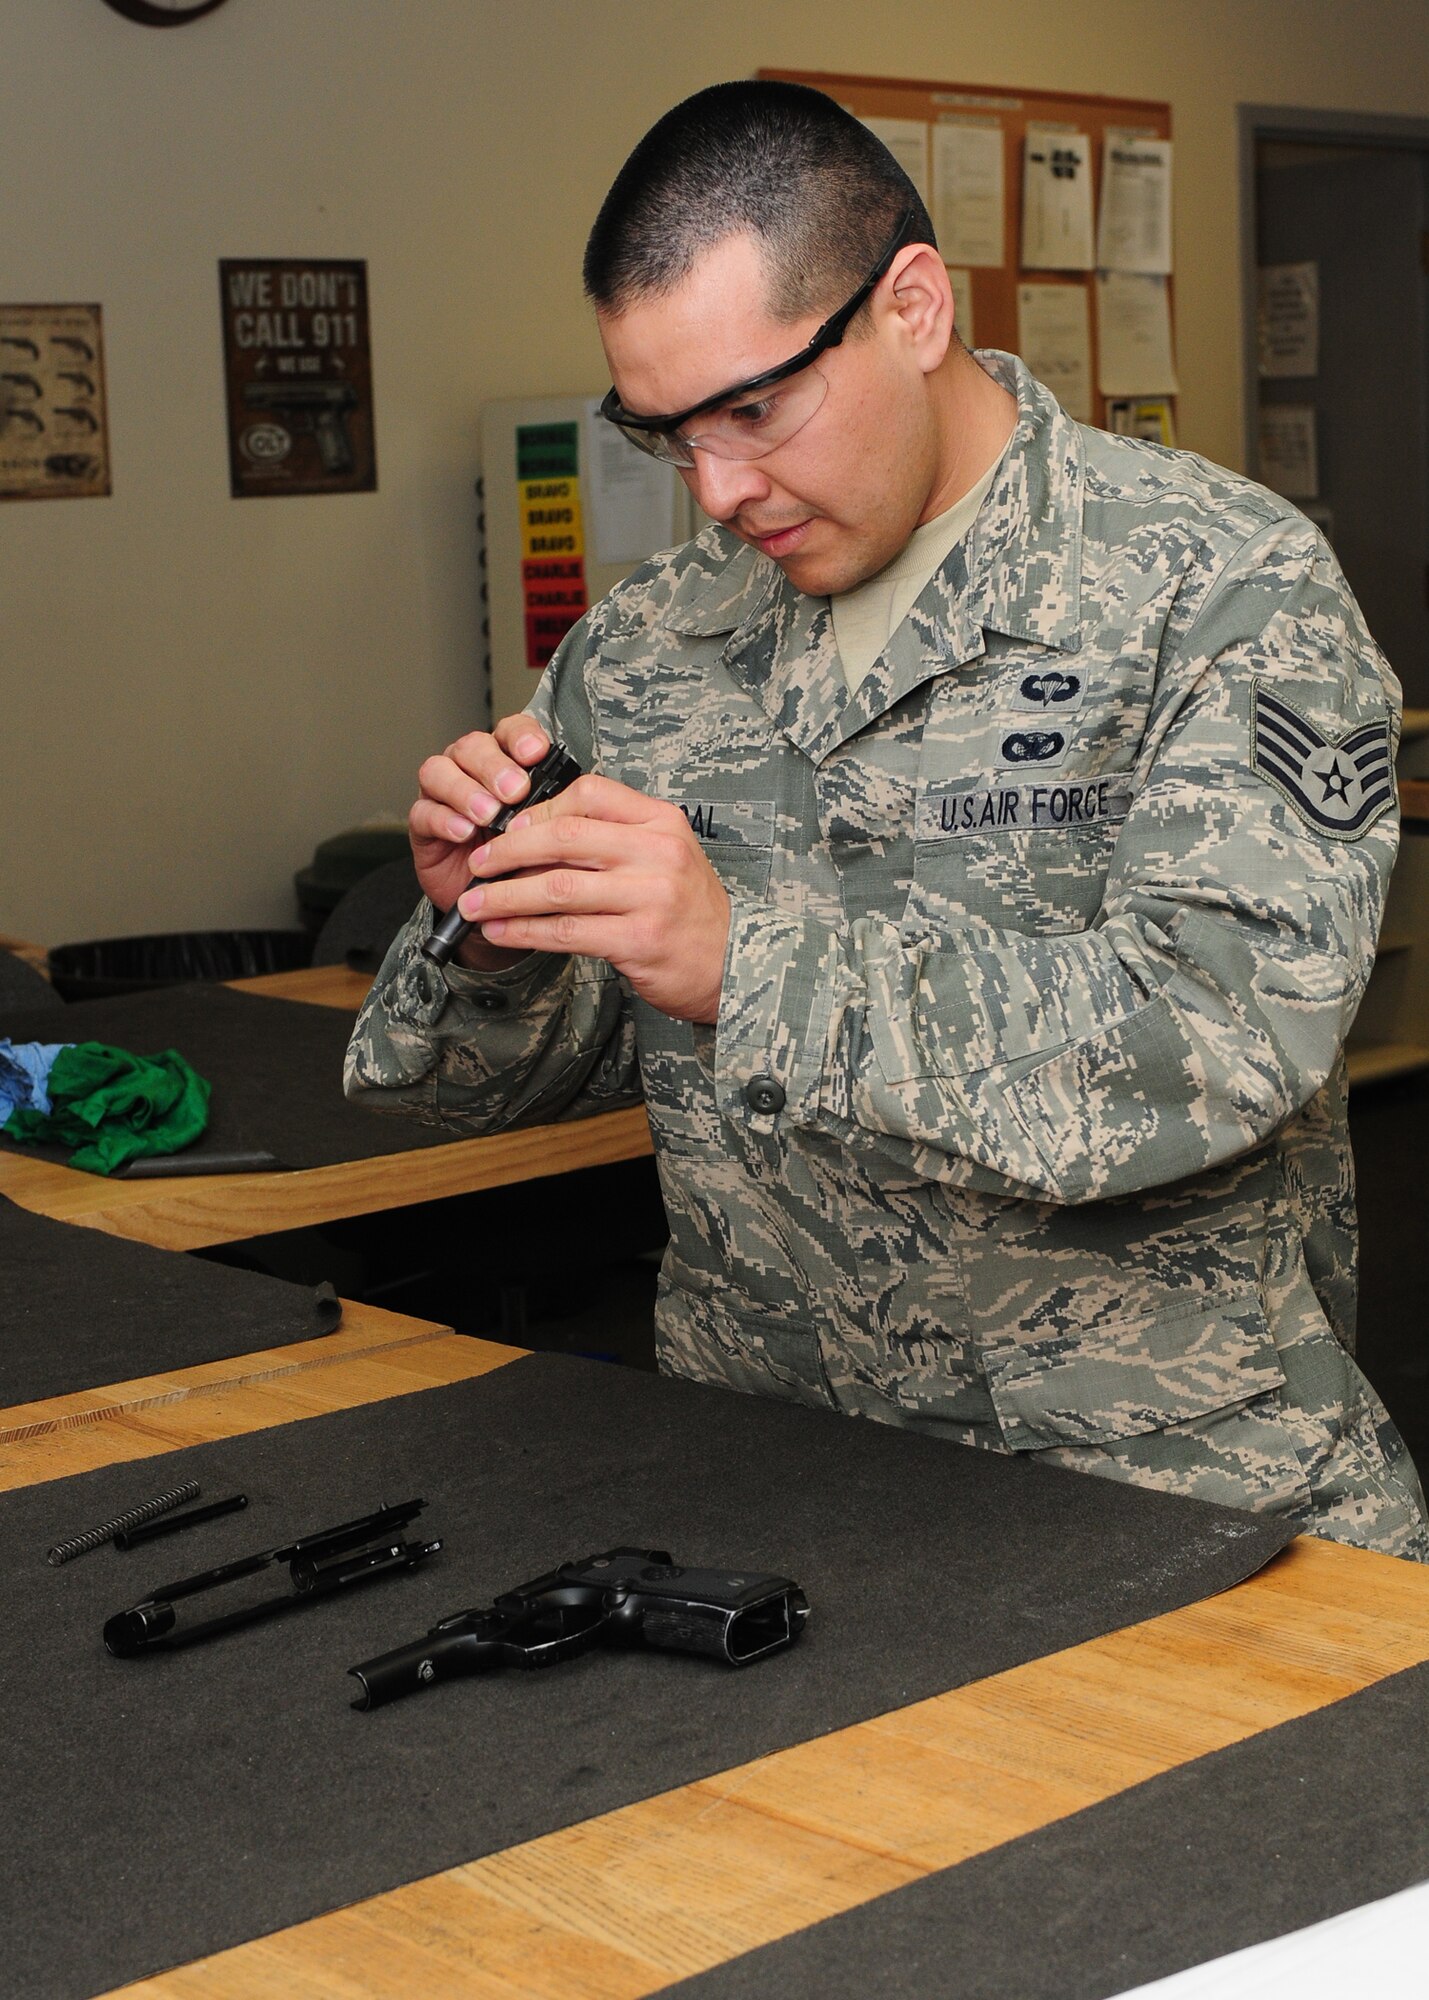 Staff Sgt. Angel Madrigal, 9th Security Forces Squadron combat arms instructor, inspects a M-9 Berretta pistol at the combat arms facility on Beale Air Force Base, Calif., Jan. 10, 2013. The combat arms instructors are in charge of inspecting each weapon to ensure they are serviceable. (U.S. Air Force photo by Senior Airman Allen Pollard/Released)